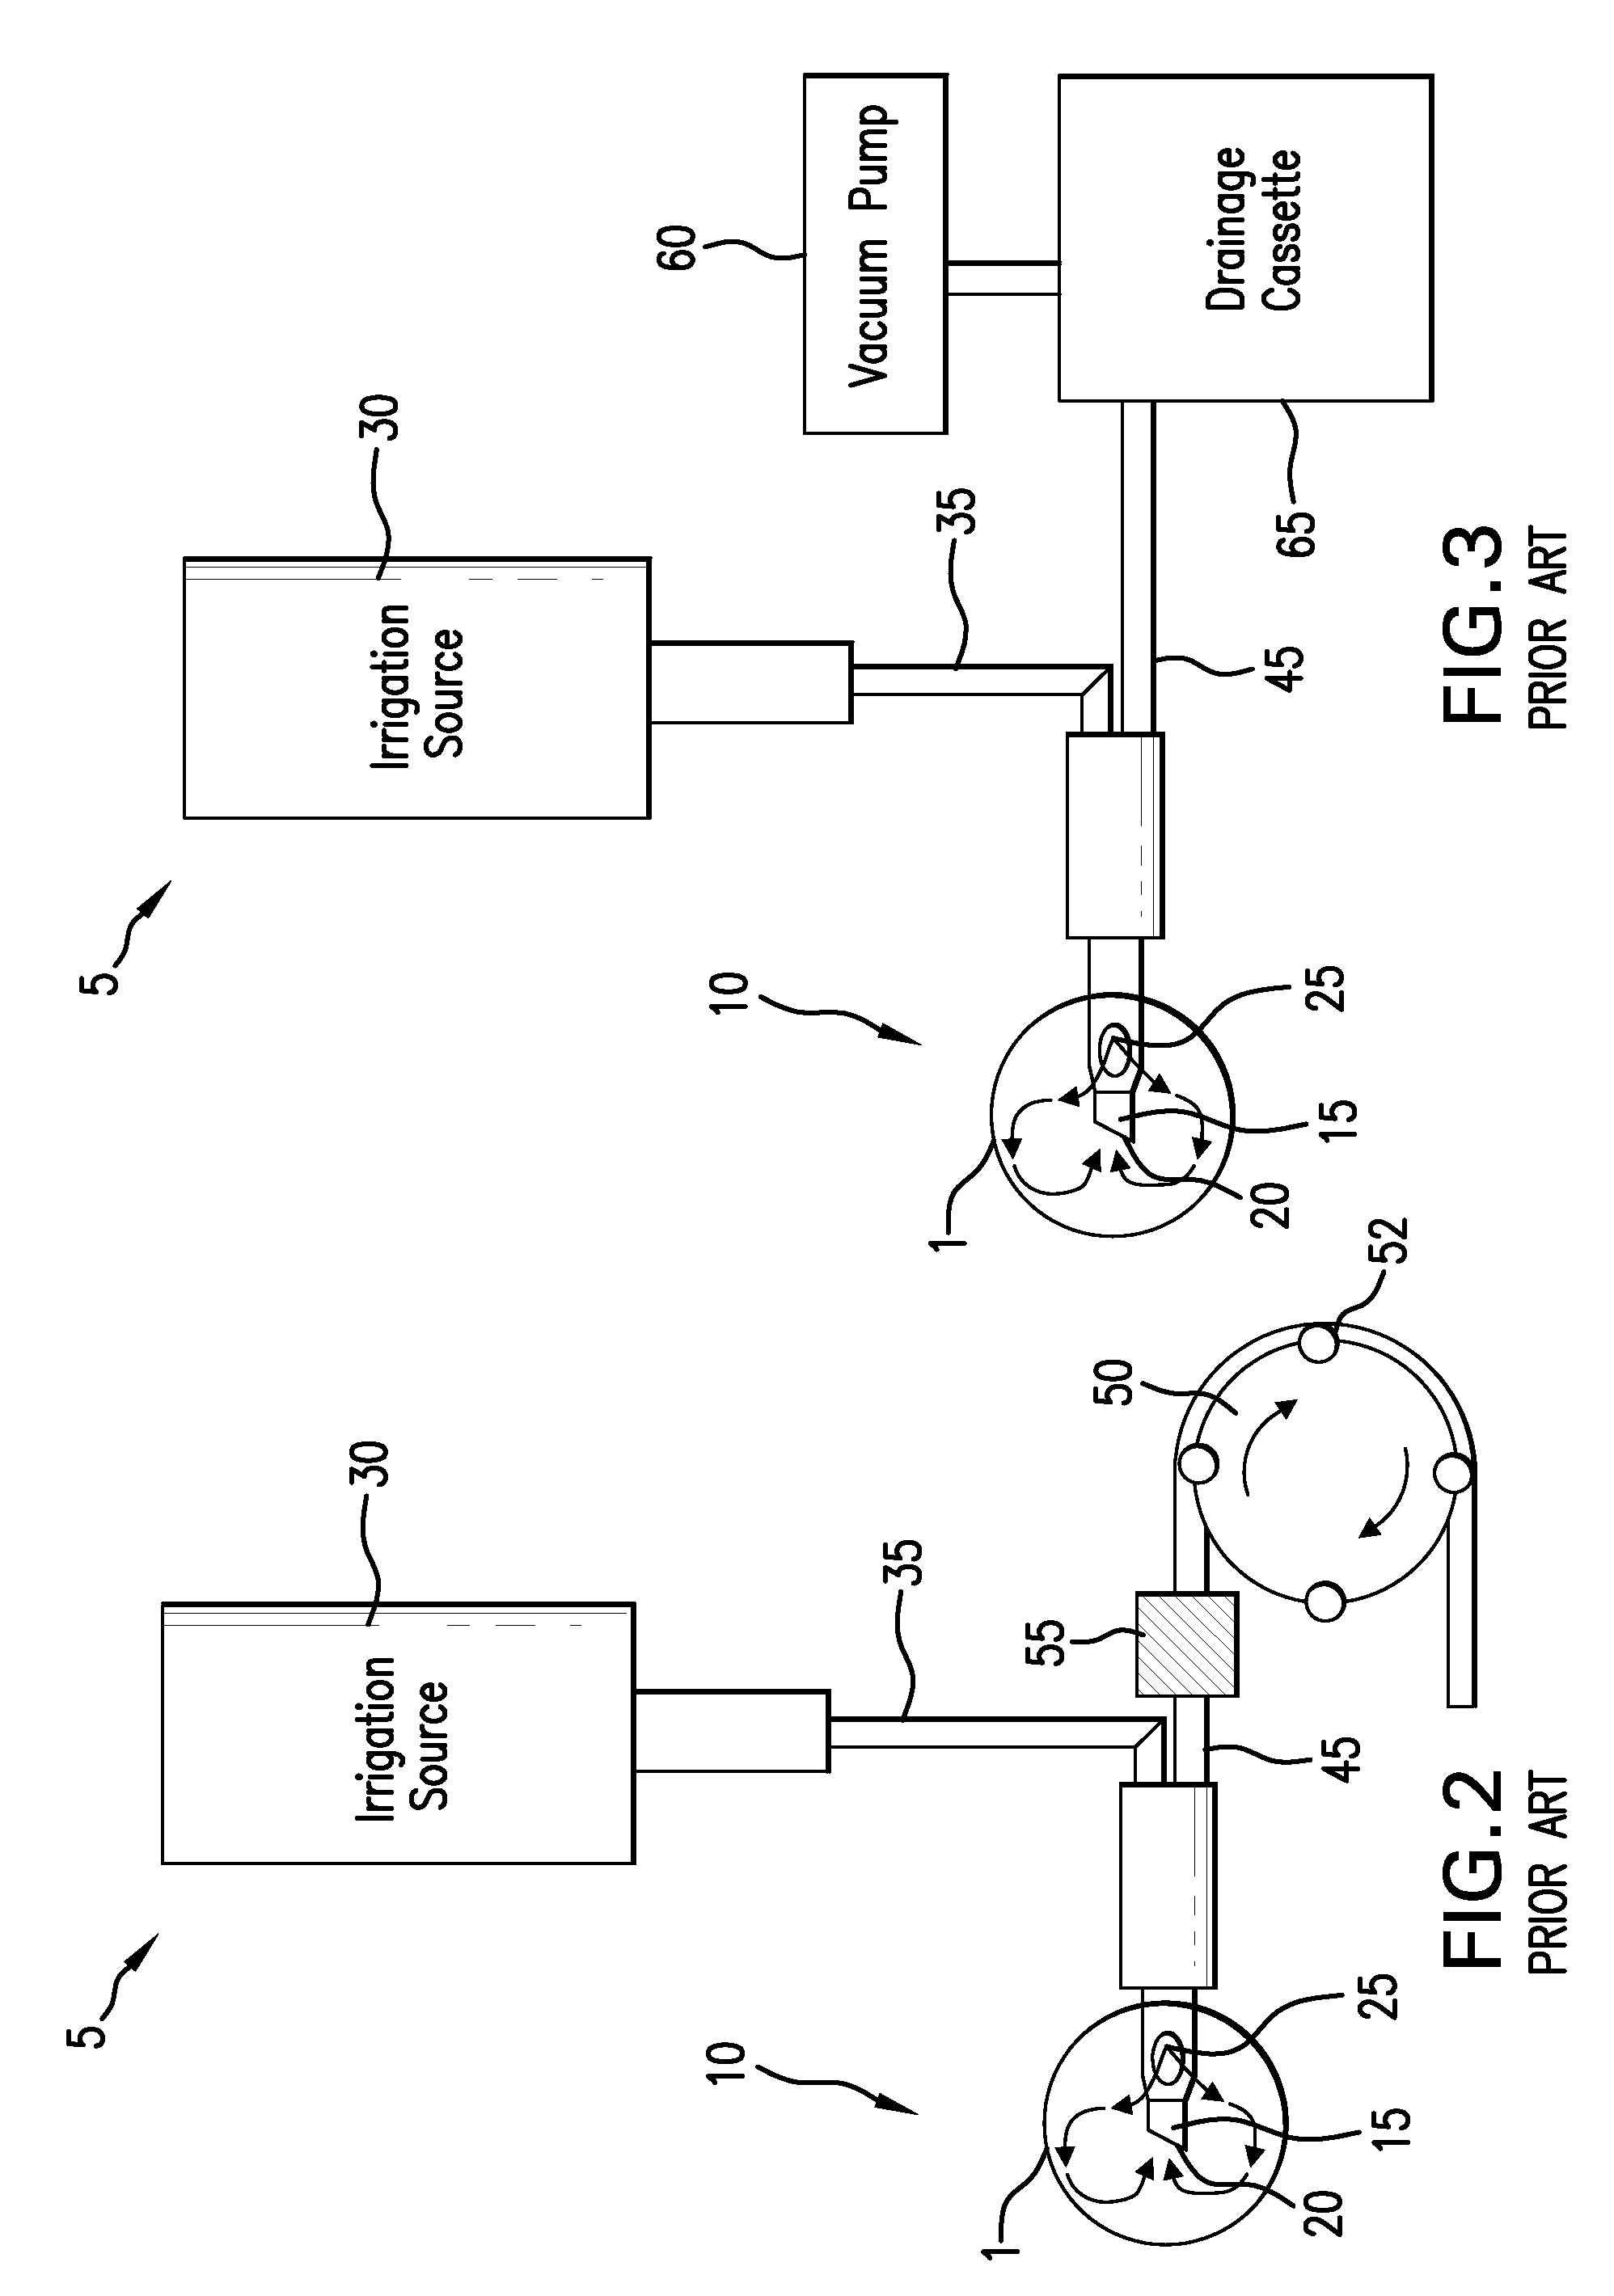 Systems and methods for phacoemulsification with vacuum based pumps